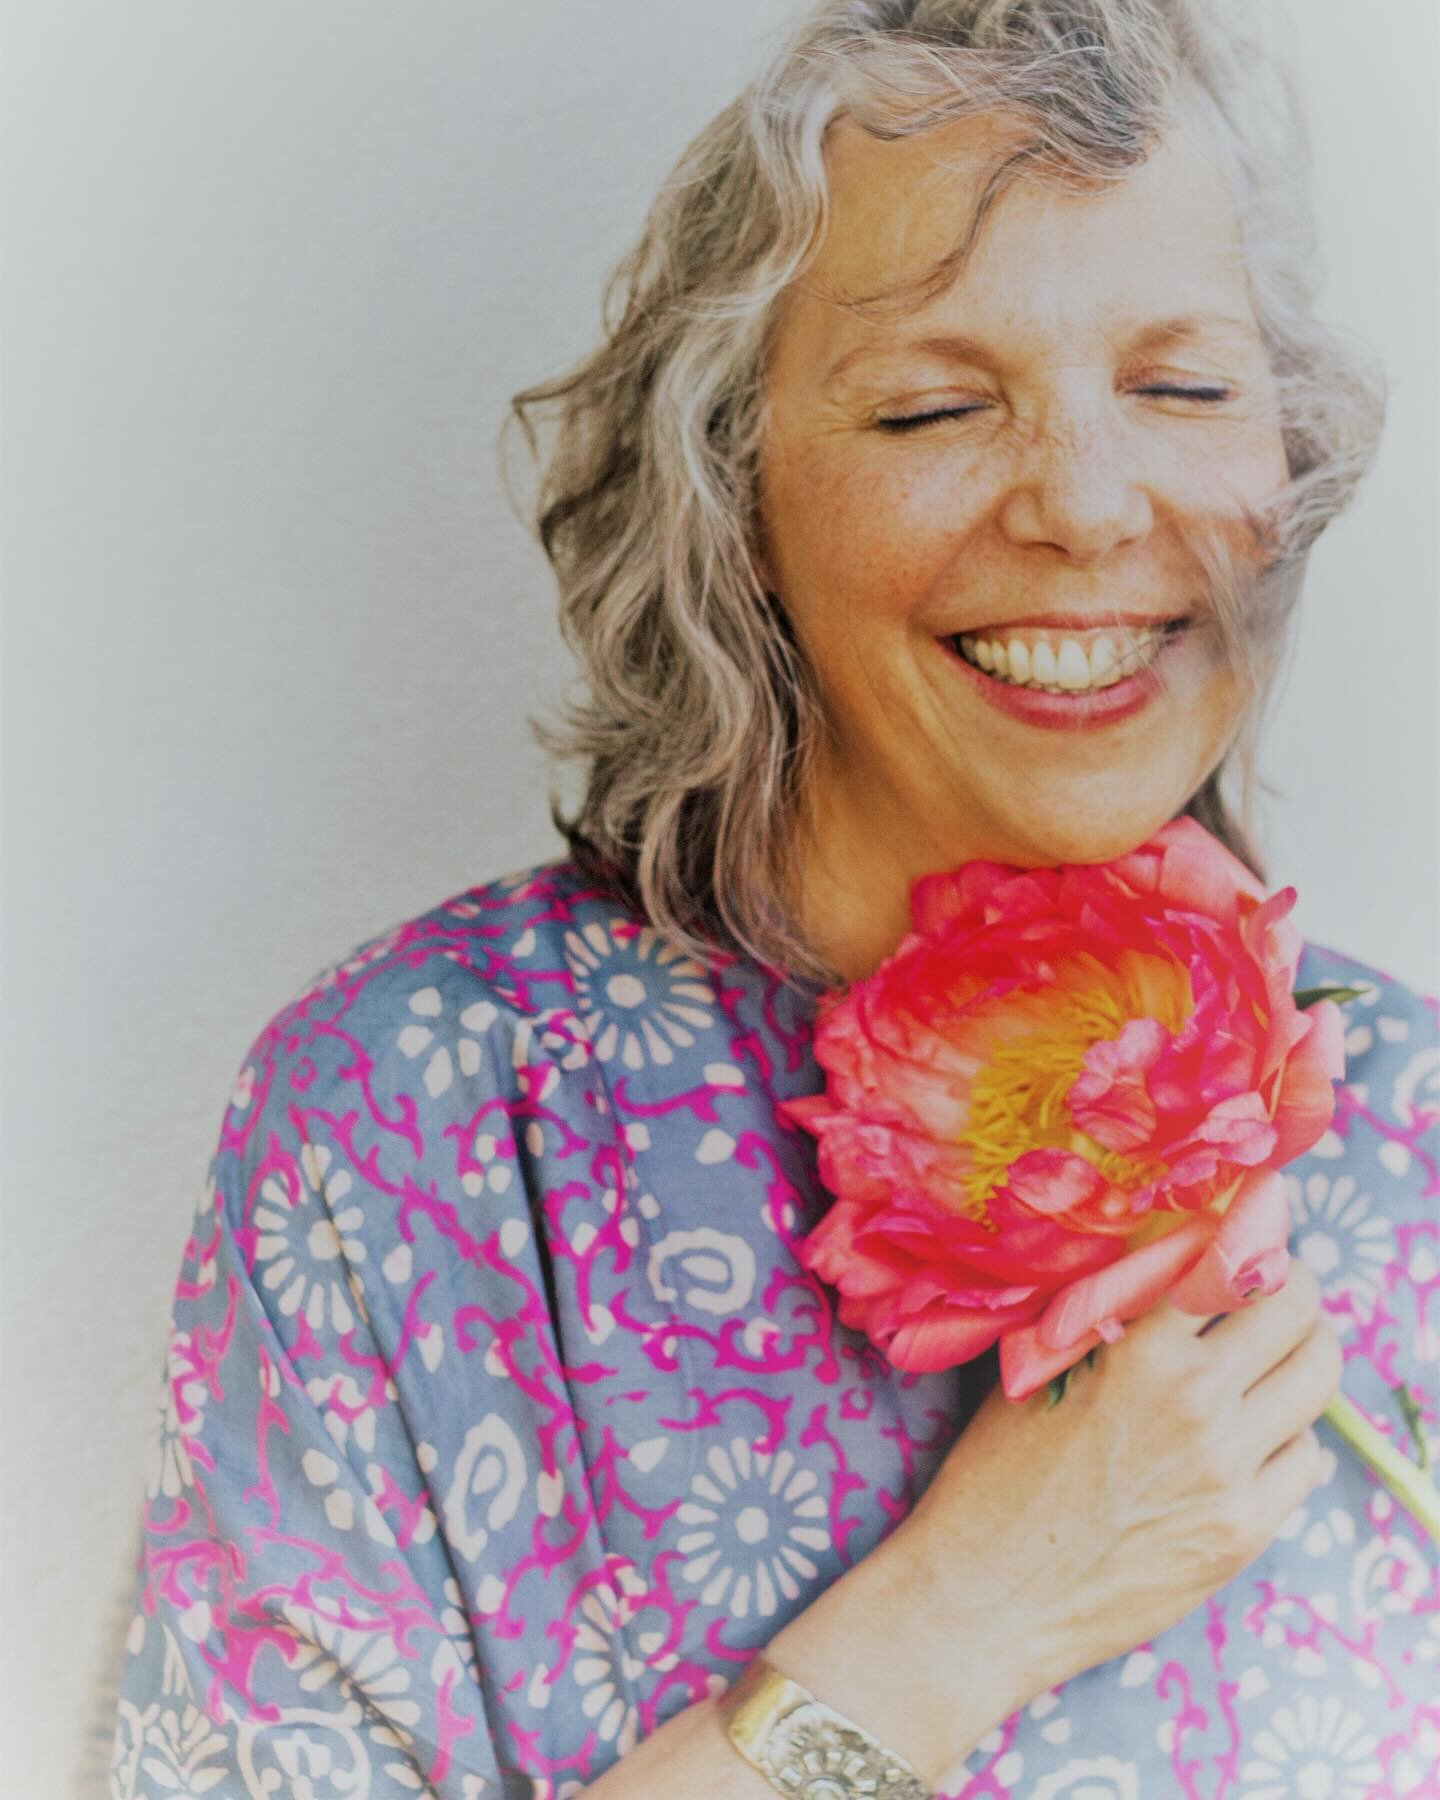 ✨ A personal story about meeting my luminous self. 
⬇️
I unexpectedly met my most luminous self while going through breast cancer treatment in 2019. 

During this time, I turned away from hyperactive achievement culture, rested deeply, and took a div